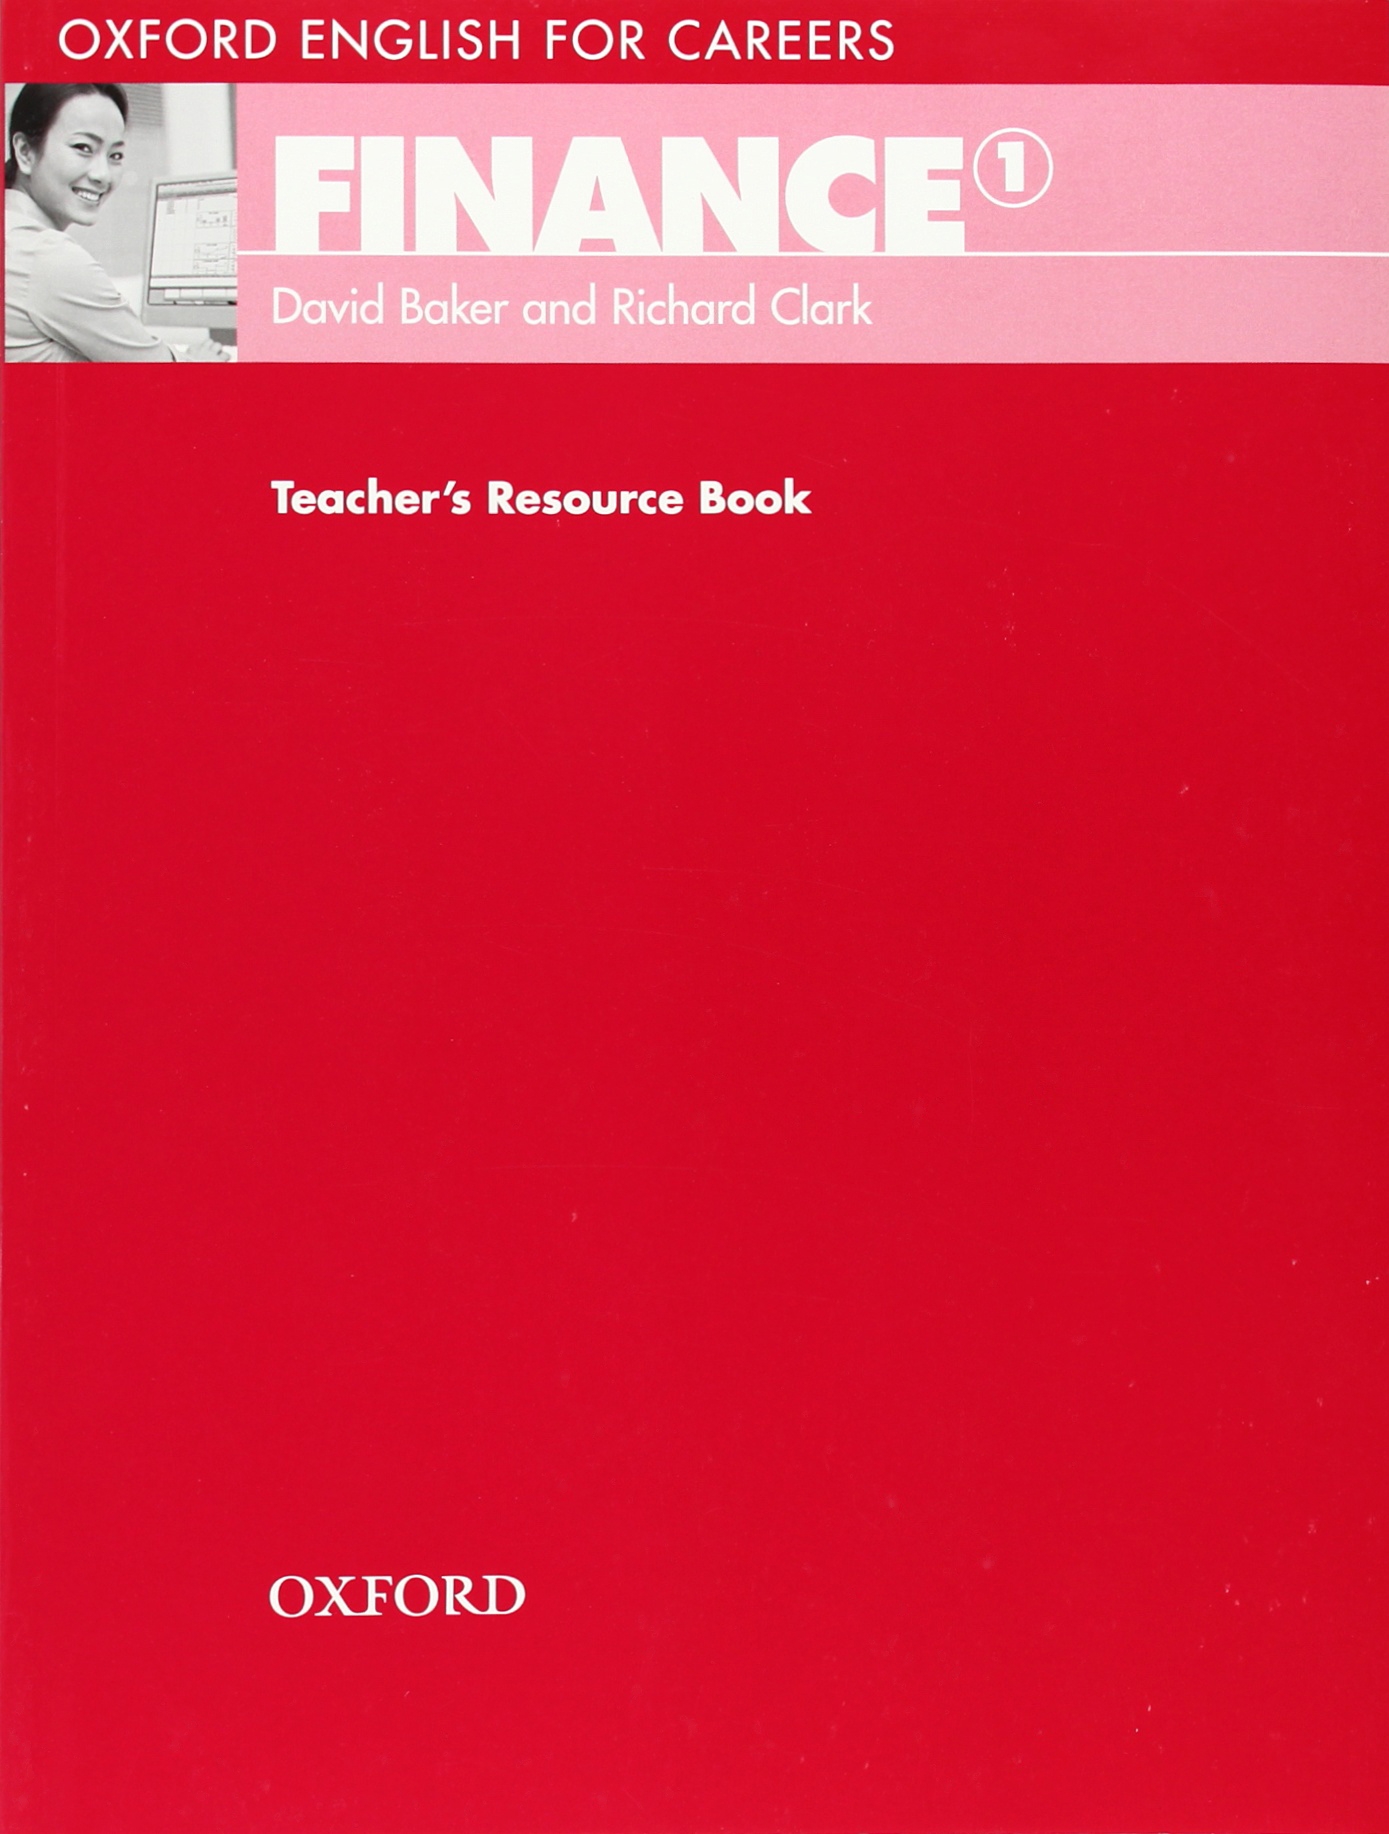 FINANCE (OXFORD ENGLISH FOR CAREERS) 1 Teacher's Resource Book